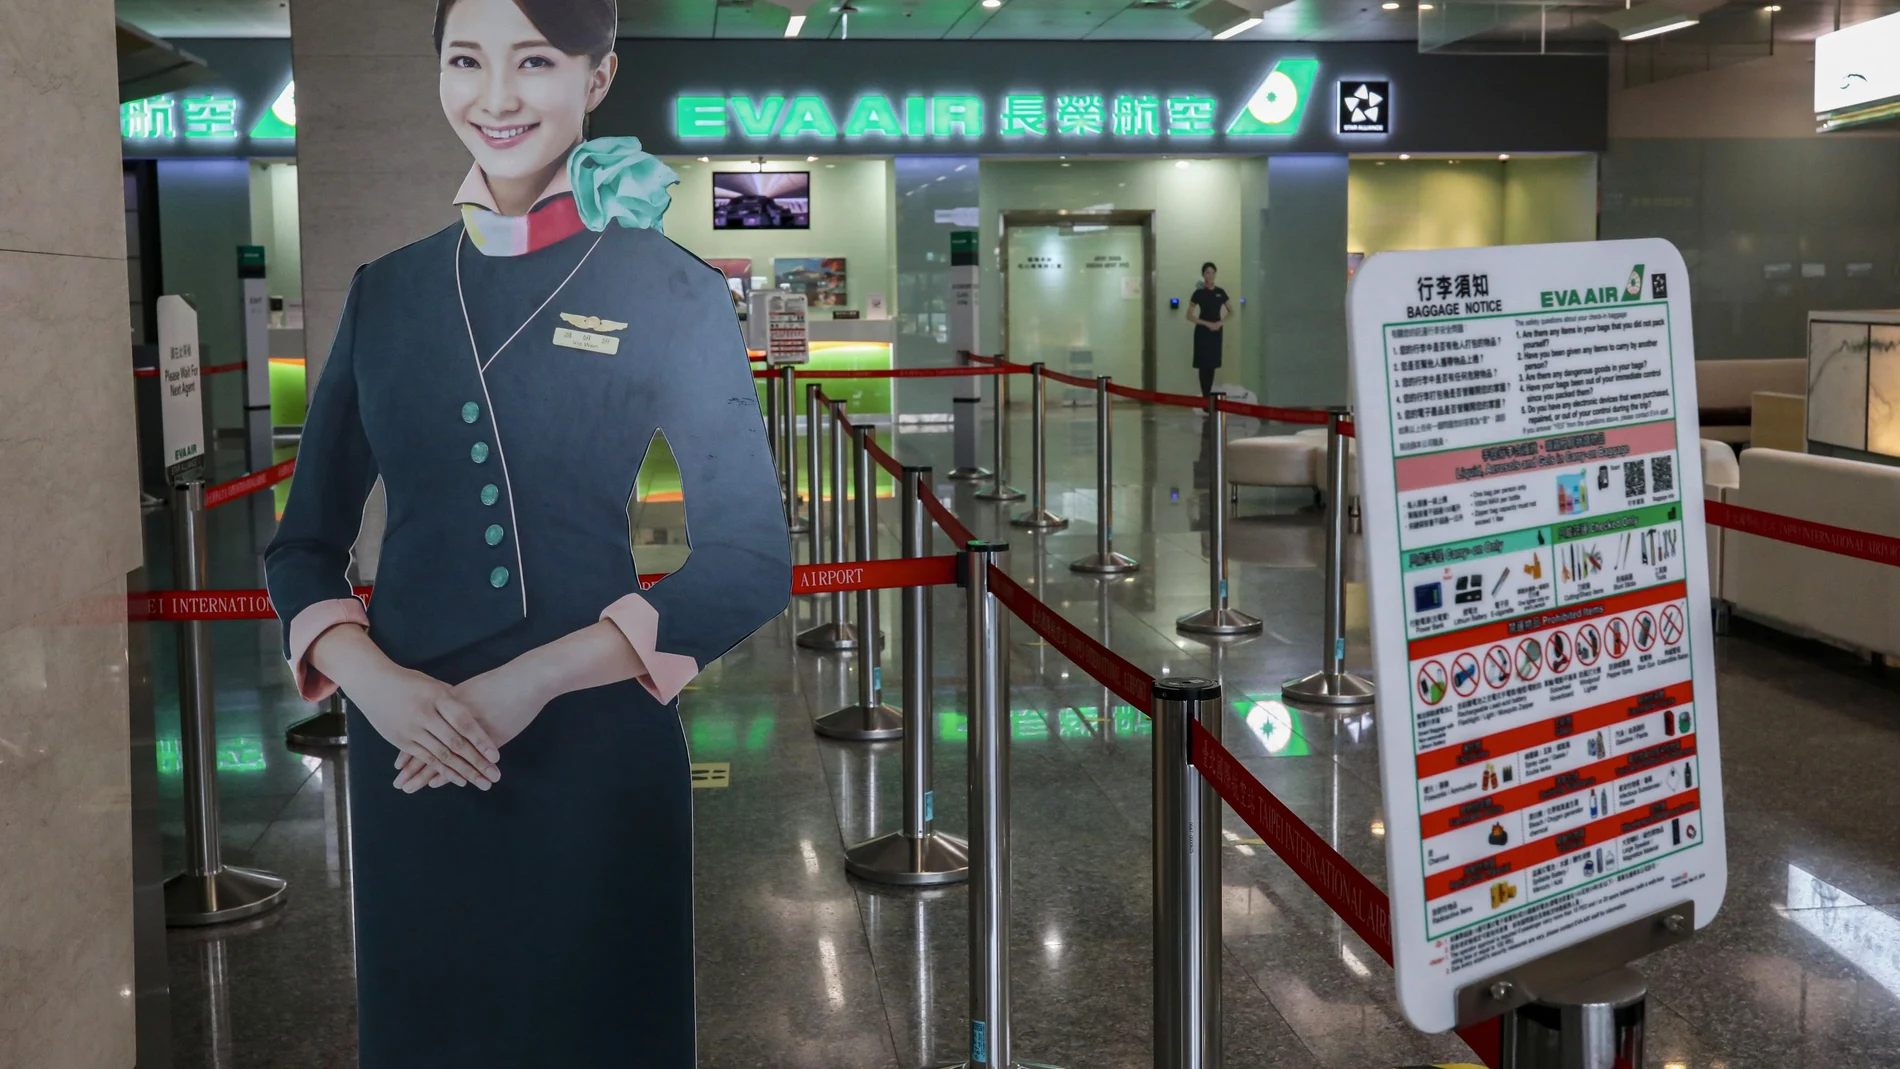 Human-sized flight attendant dummies are seen on display at an empty check-in counter for Evergreen Airways at Taipei Songshan Airport in Taipei